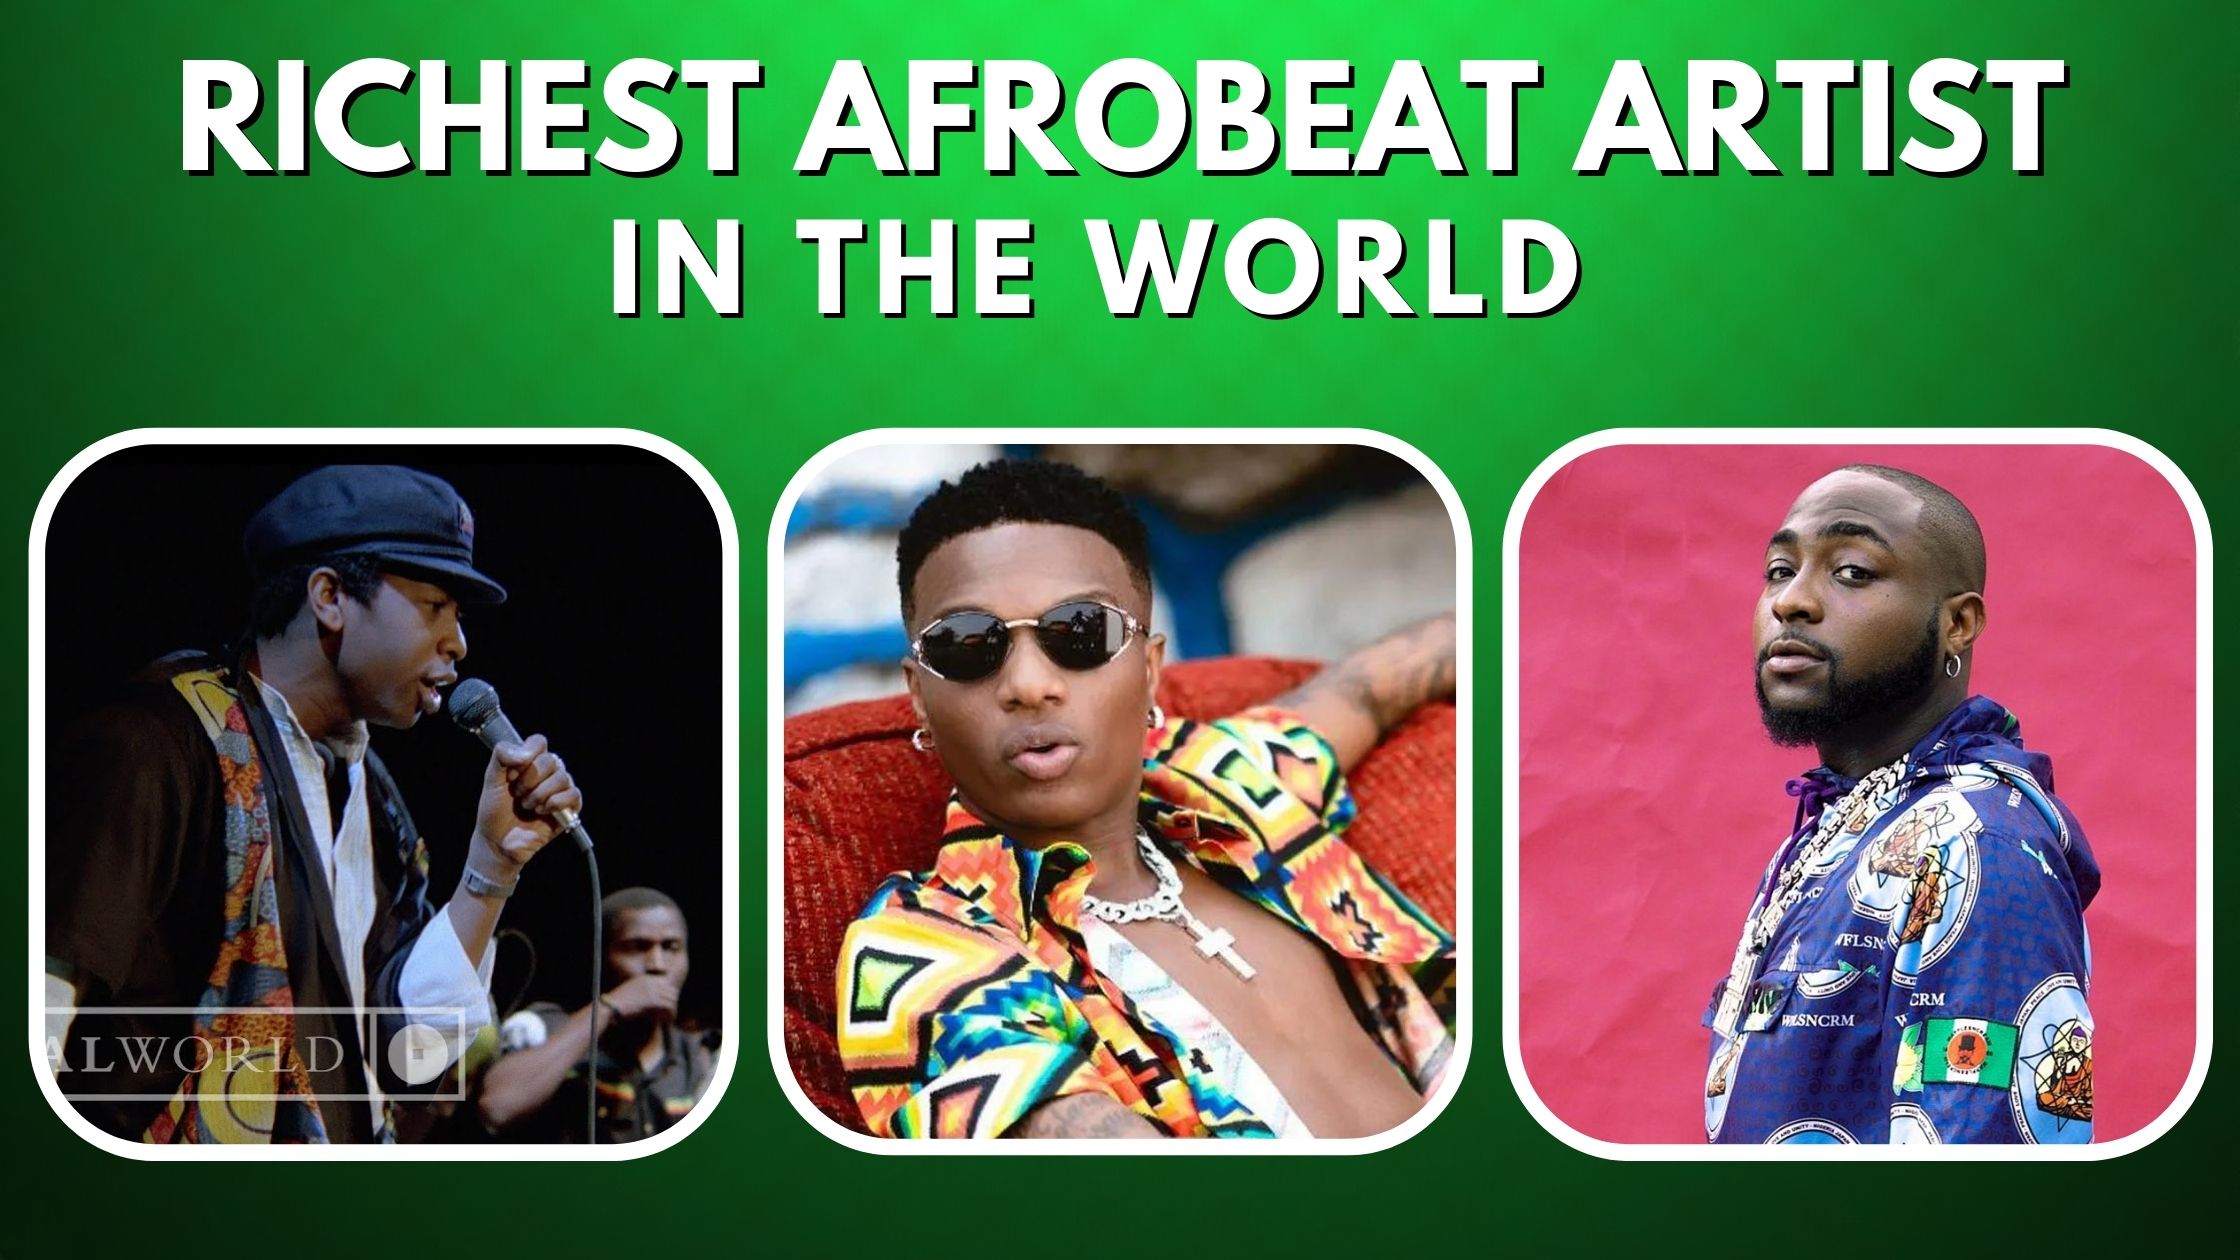 Top 10 Richest Afrobeat Artists In The World